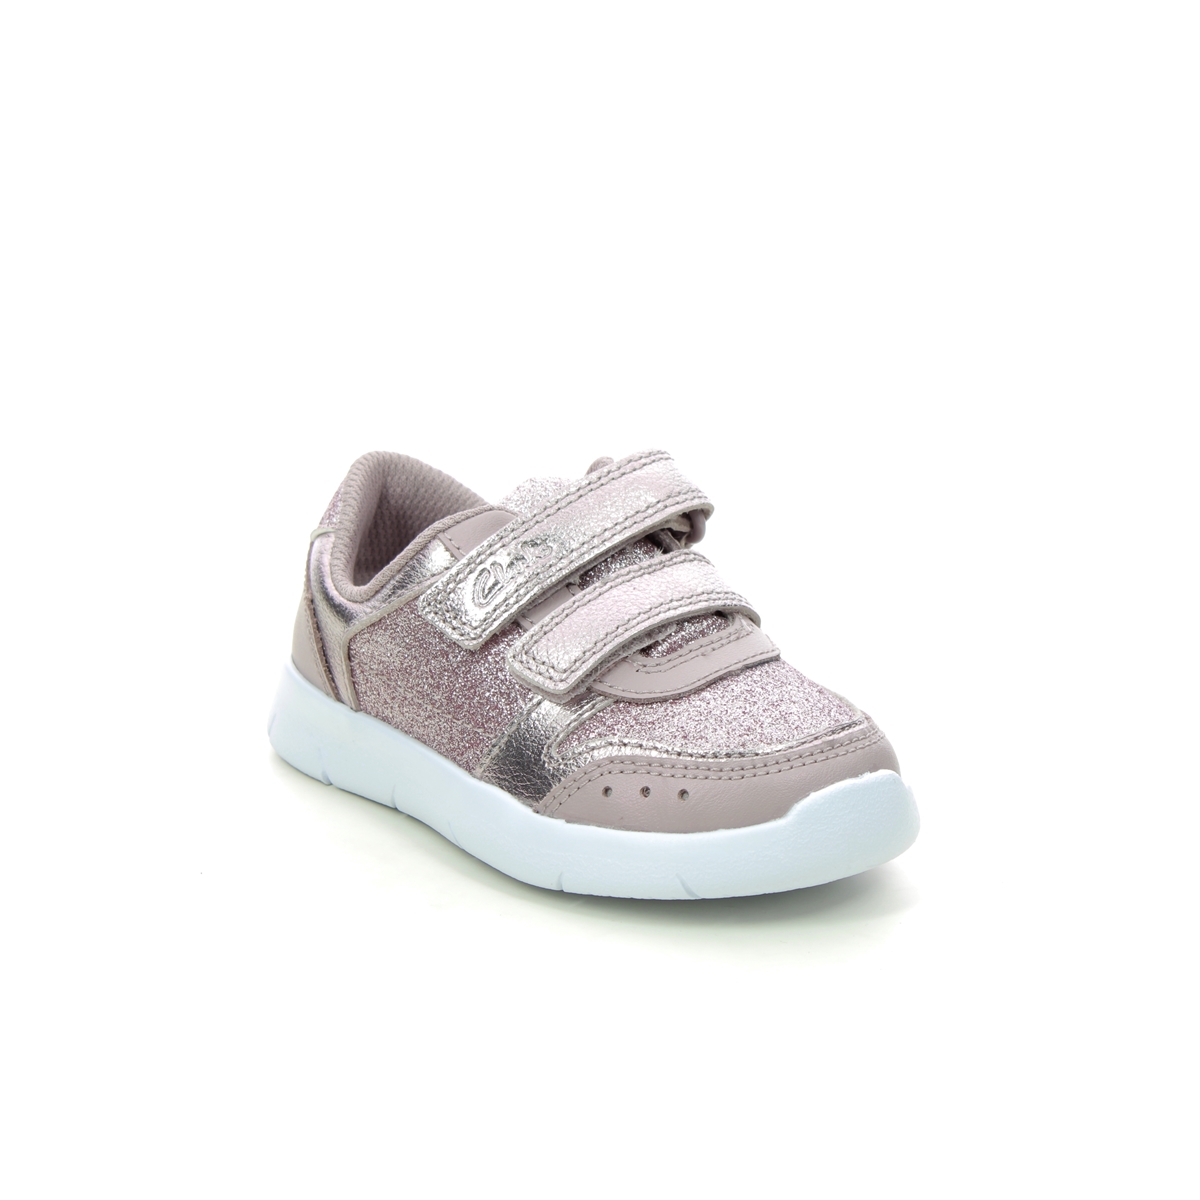 Clarks Ath Sonar T Pink Kids Toddler Girls Trainers 683726F In Size 4 In Plain Pink F Width Fitting Regular Fit For kids